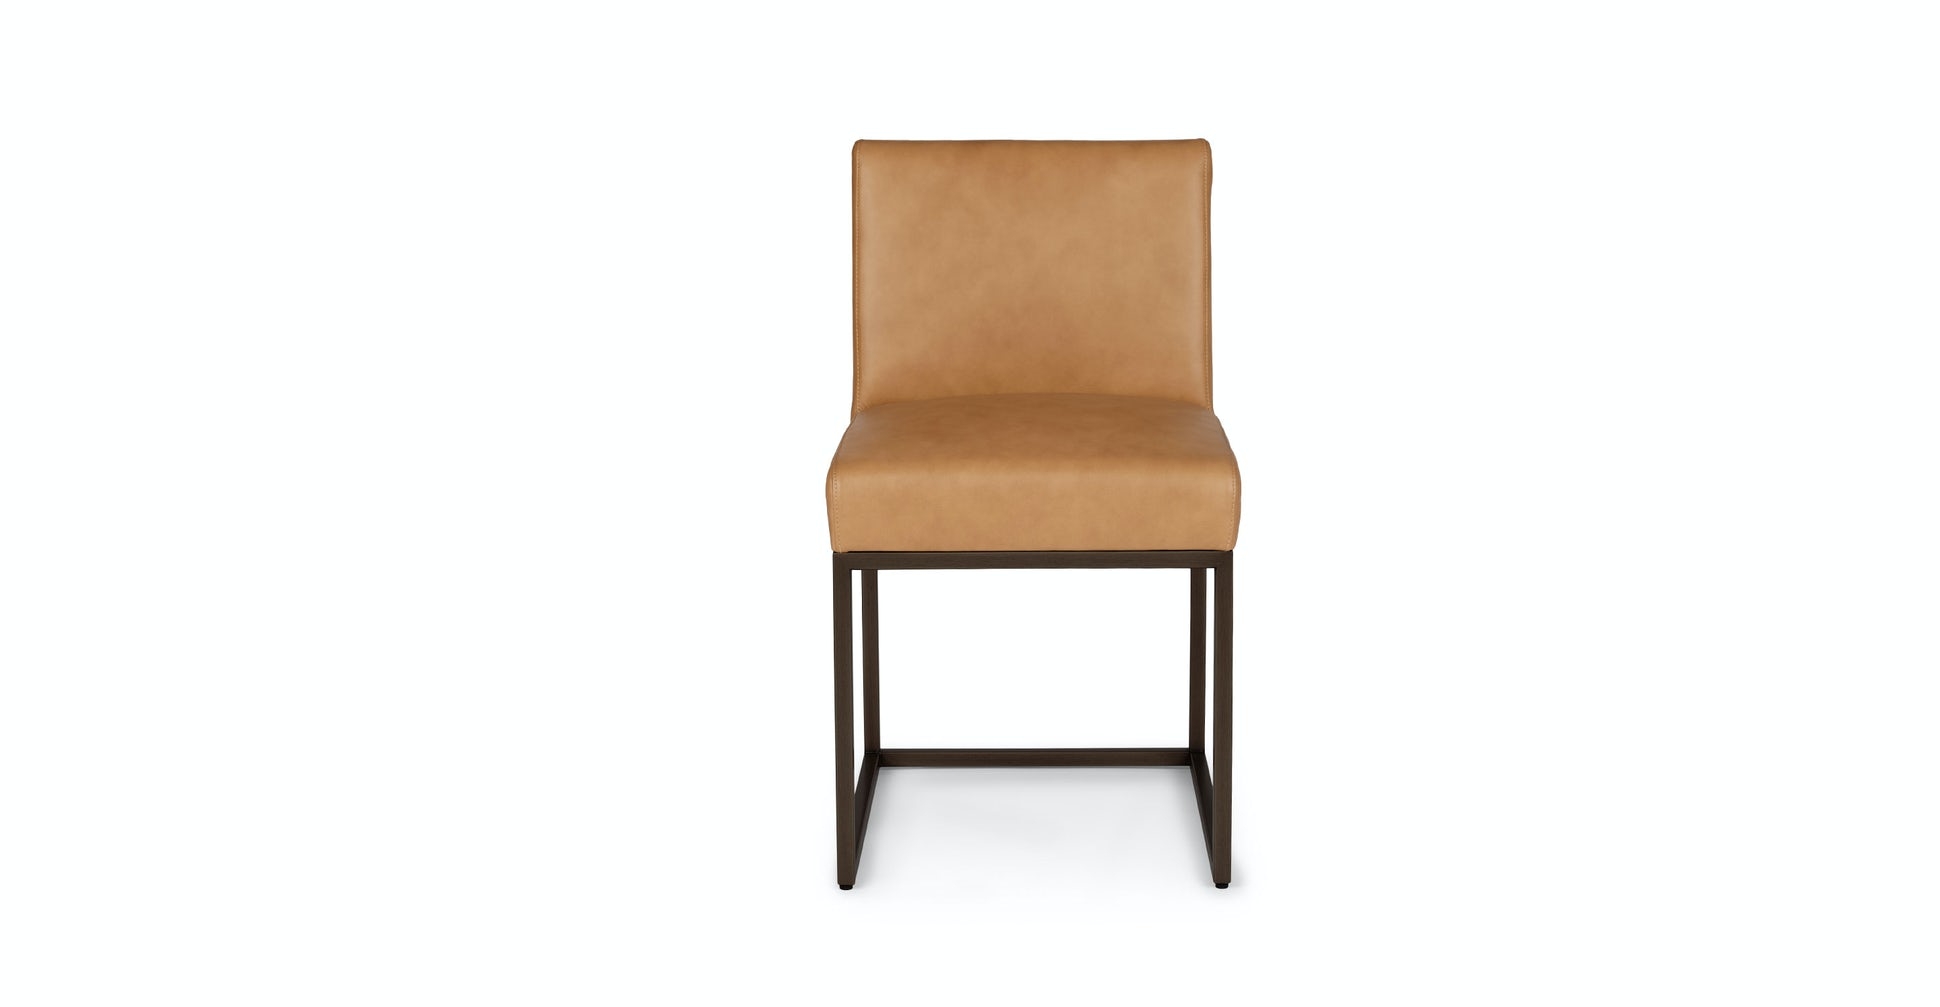 Oscuro Teres Tan Dining Chair 2 - Image 1